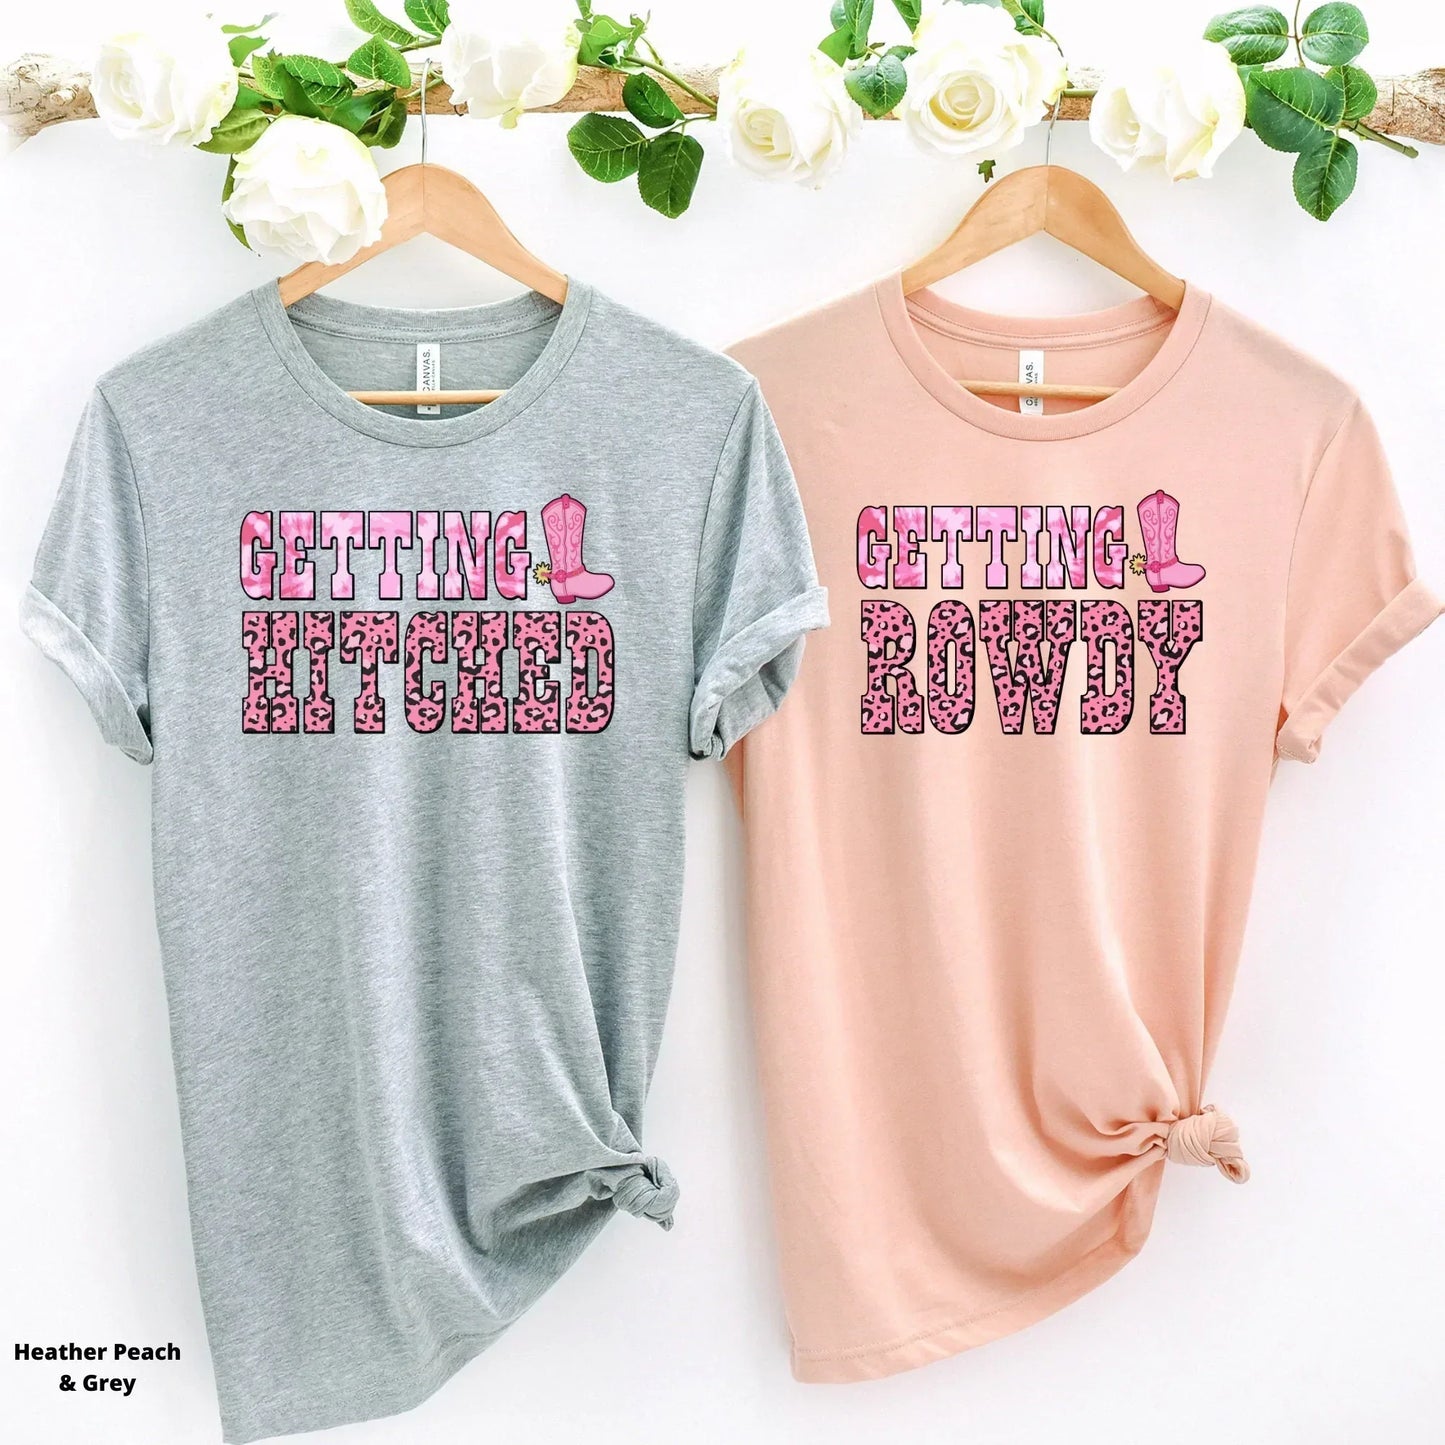 Bride Tribe Shirts, Country Bachelorette Party Shirts HMDesignStudioUS